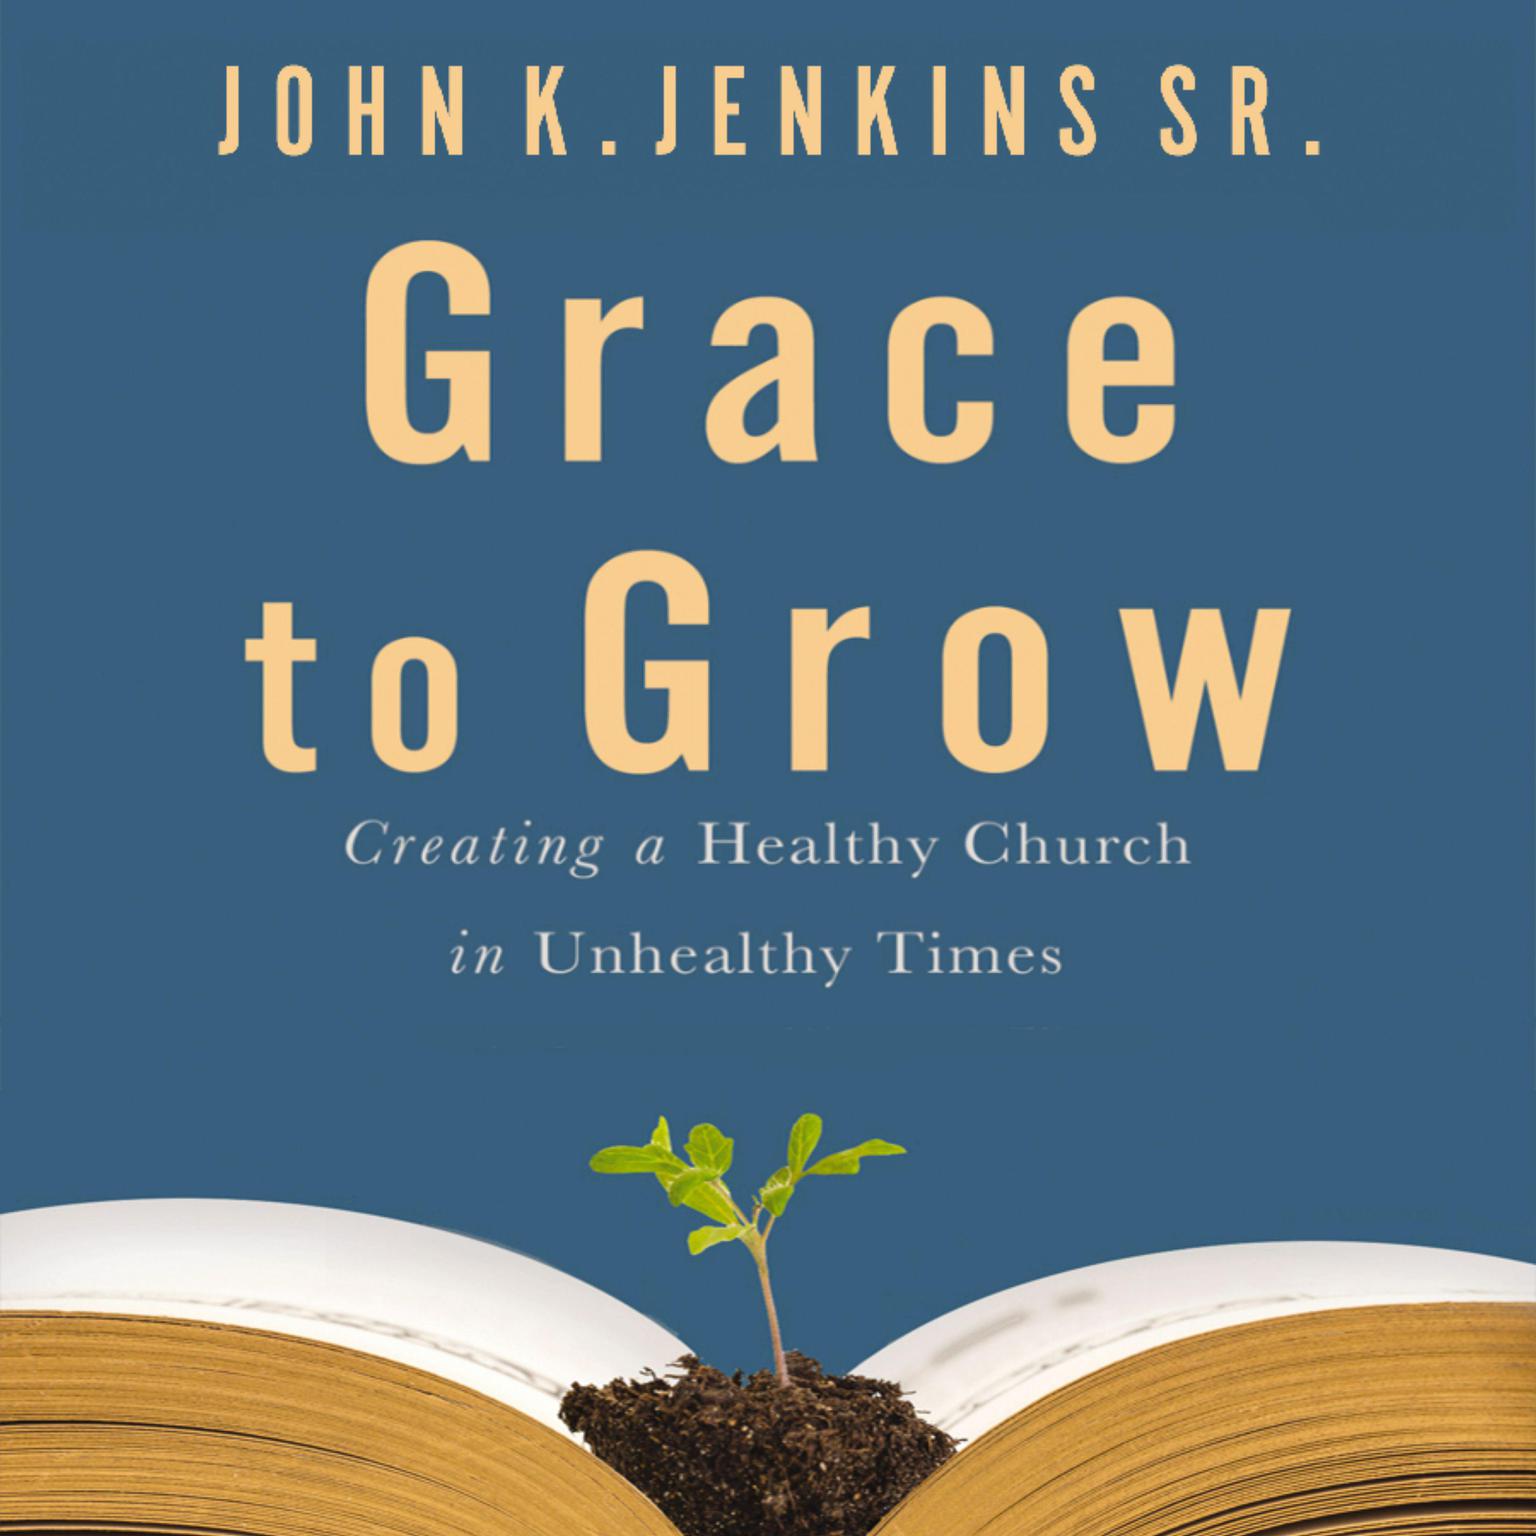 Grace to Grow: Creating a Healthy Church in Unhealthy Times Audiobook, by John K. Jenkins